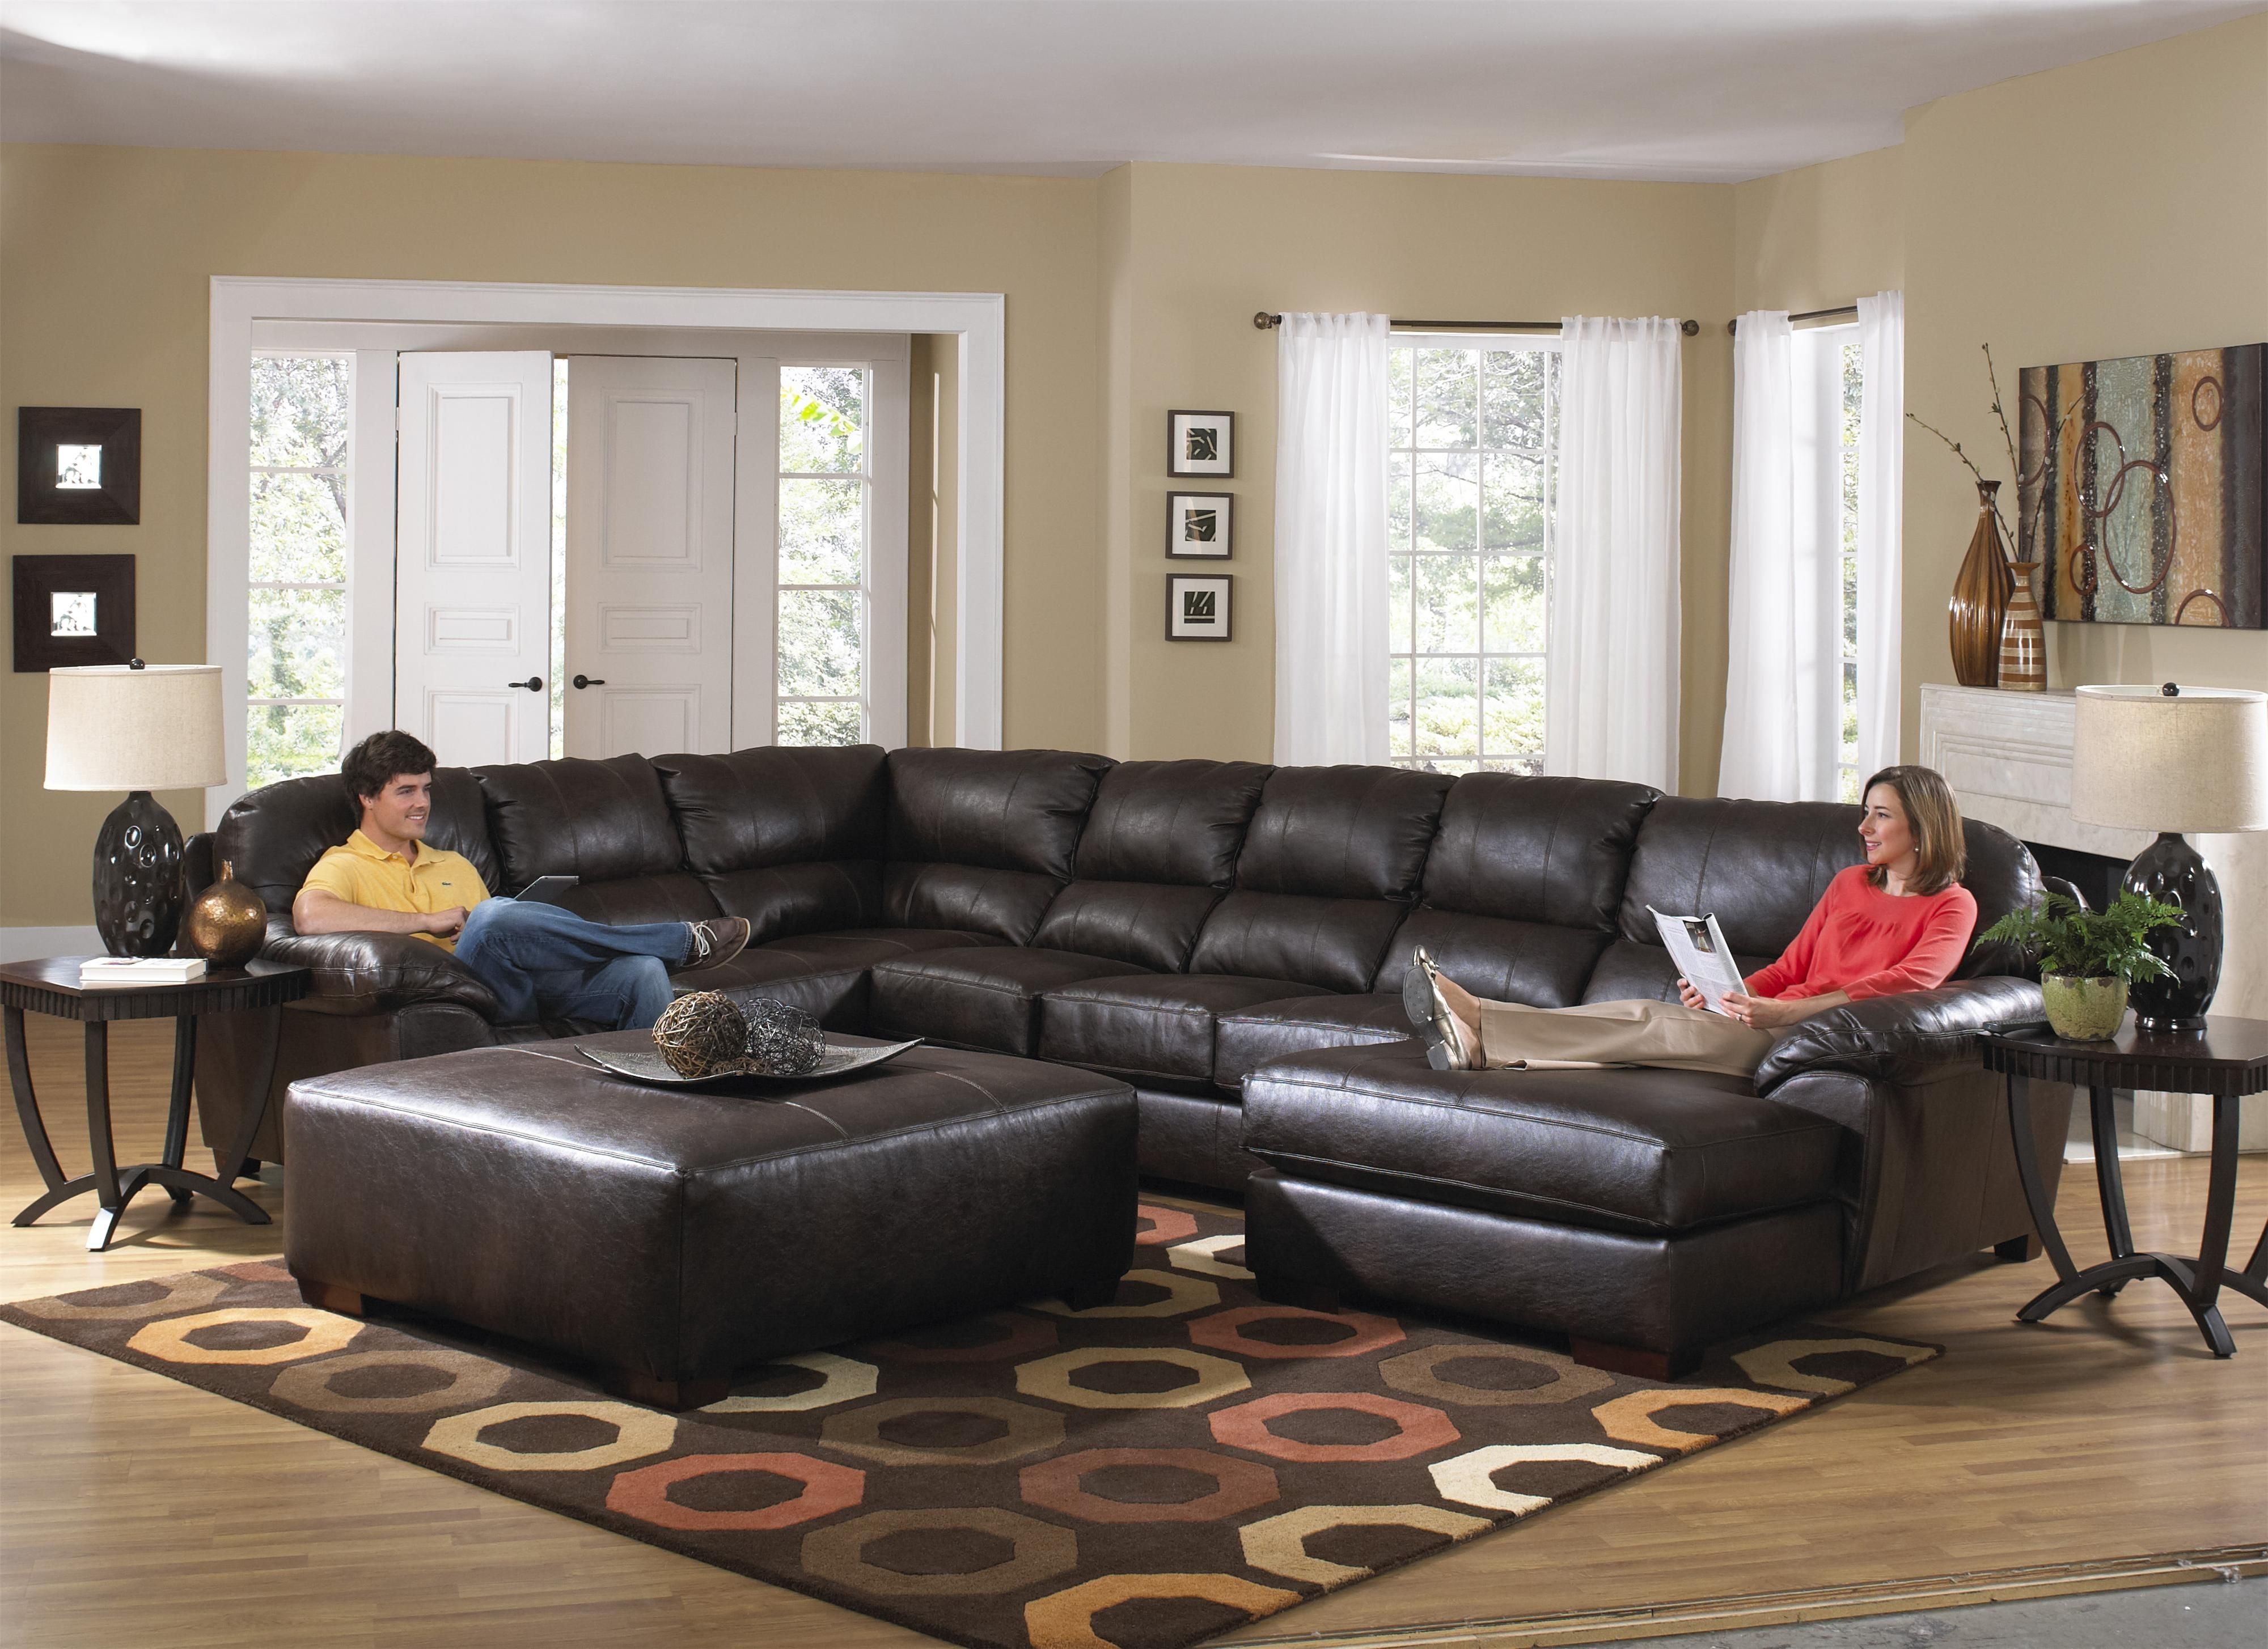 Living Room: Large Sectional Sofas In Black With Window Also Curtains Pertaining To Couches With Large Ottoman (View 8 of 15)